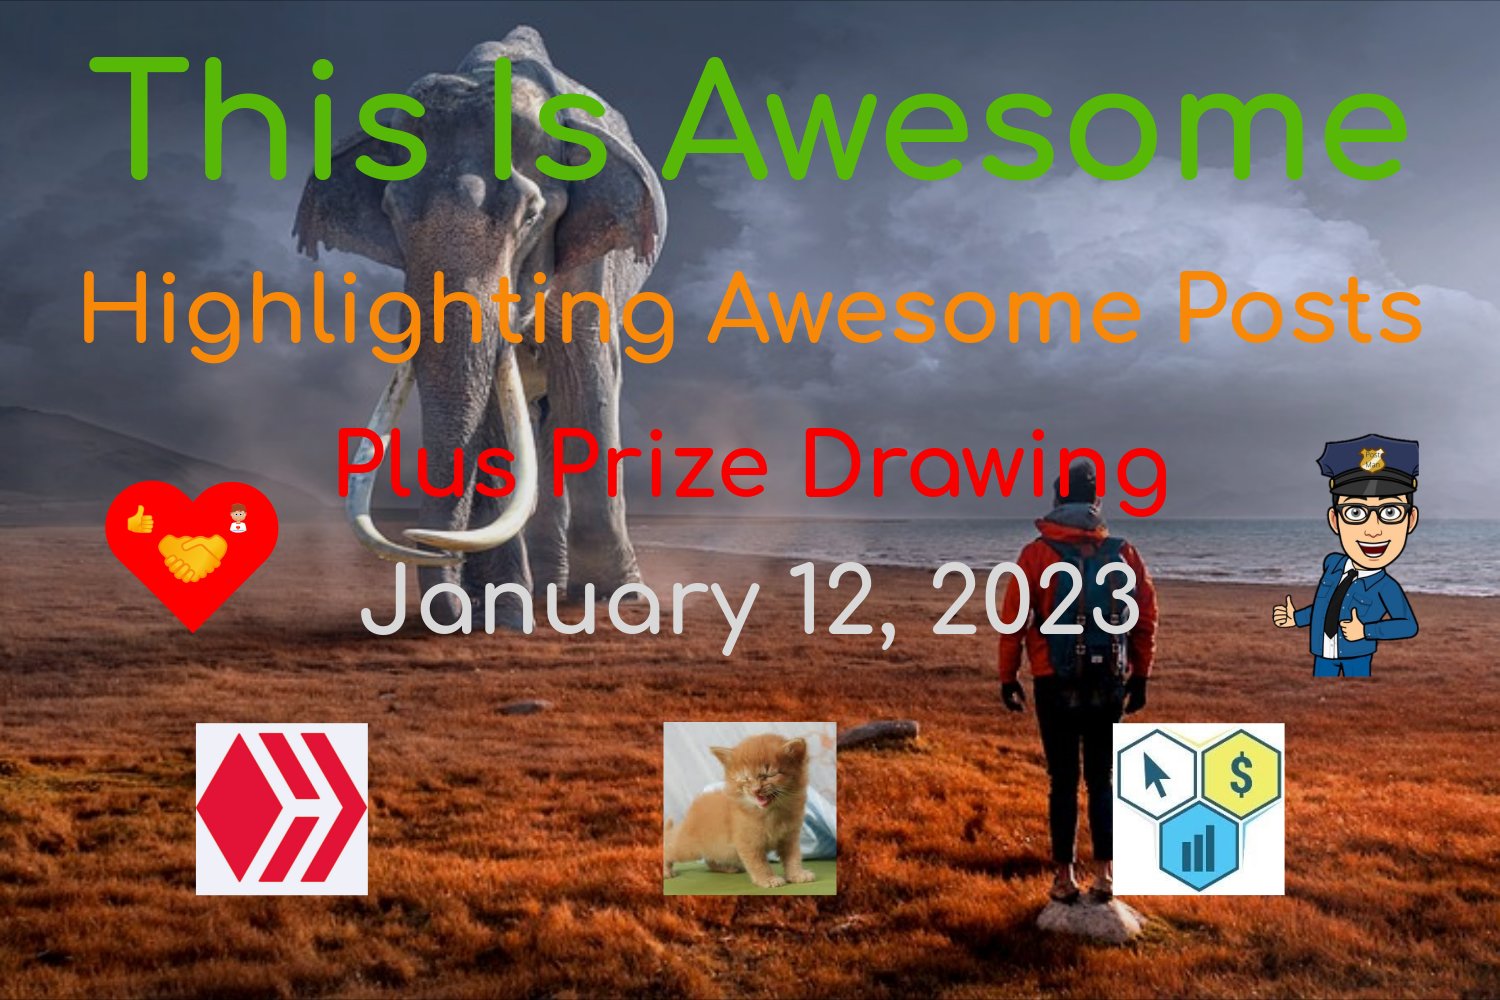 @thisisawesome/this-is-awesome-highlighting-awesome-posts-plus-prize-drawing-january-12-2023